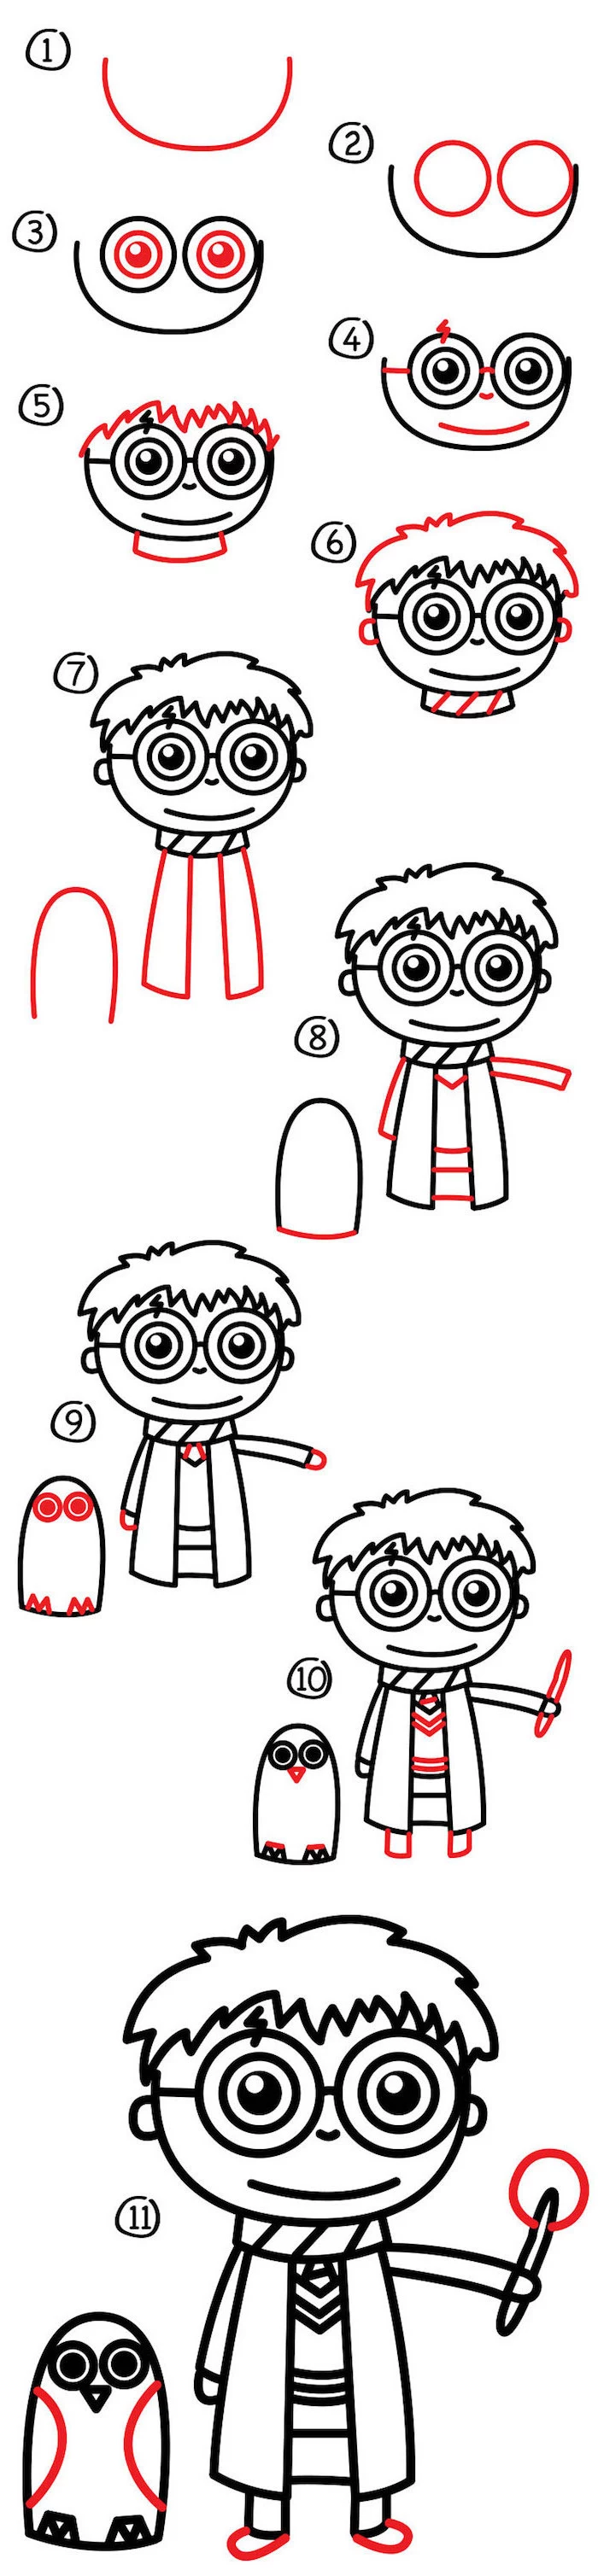 step by step diy tutorial, harry potter doodles, harry holding a wand, hedwig standing next to him, eleven step tutorial